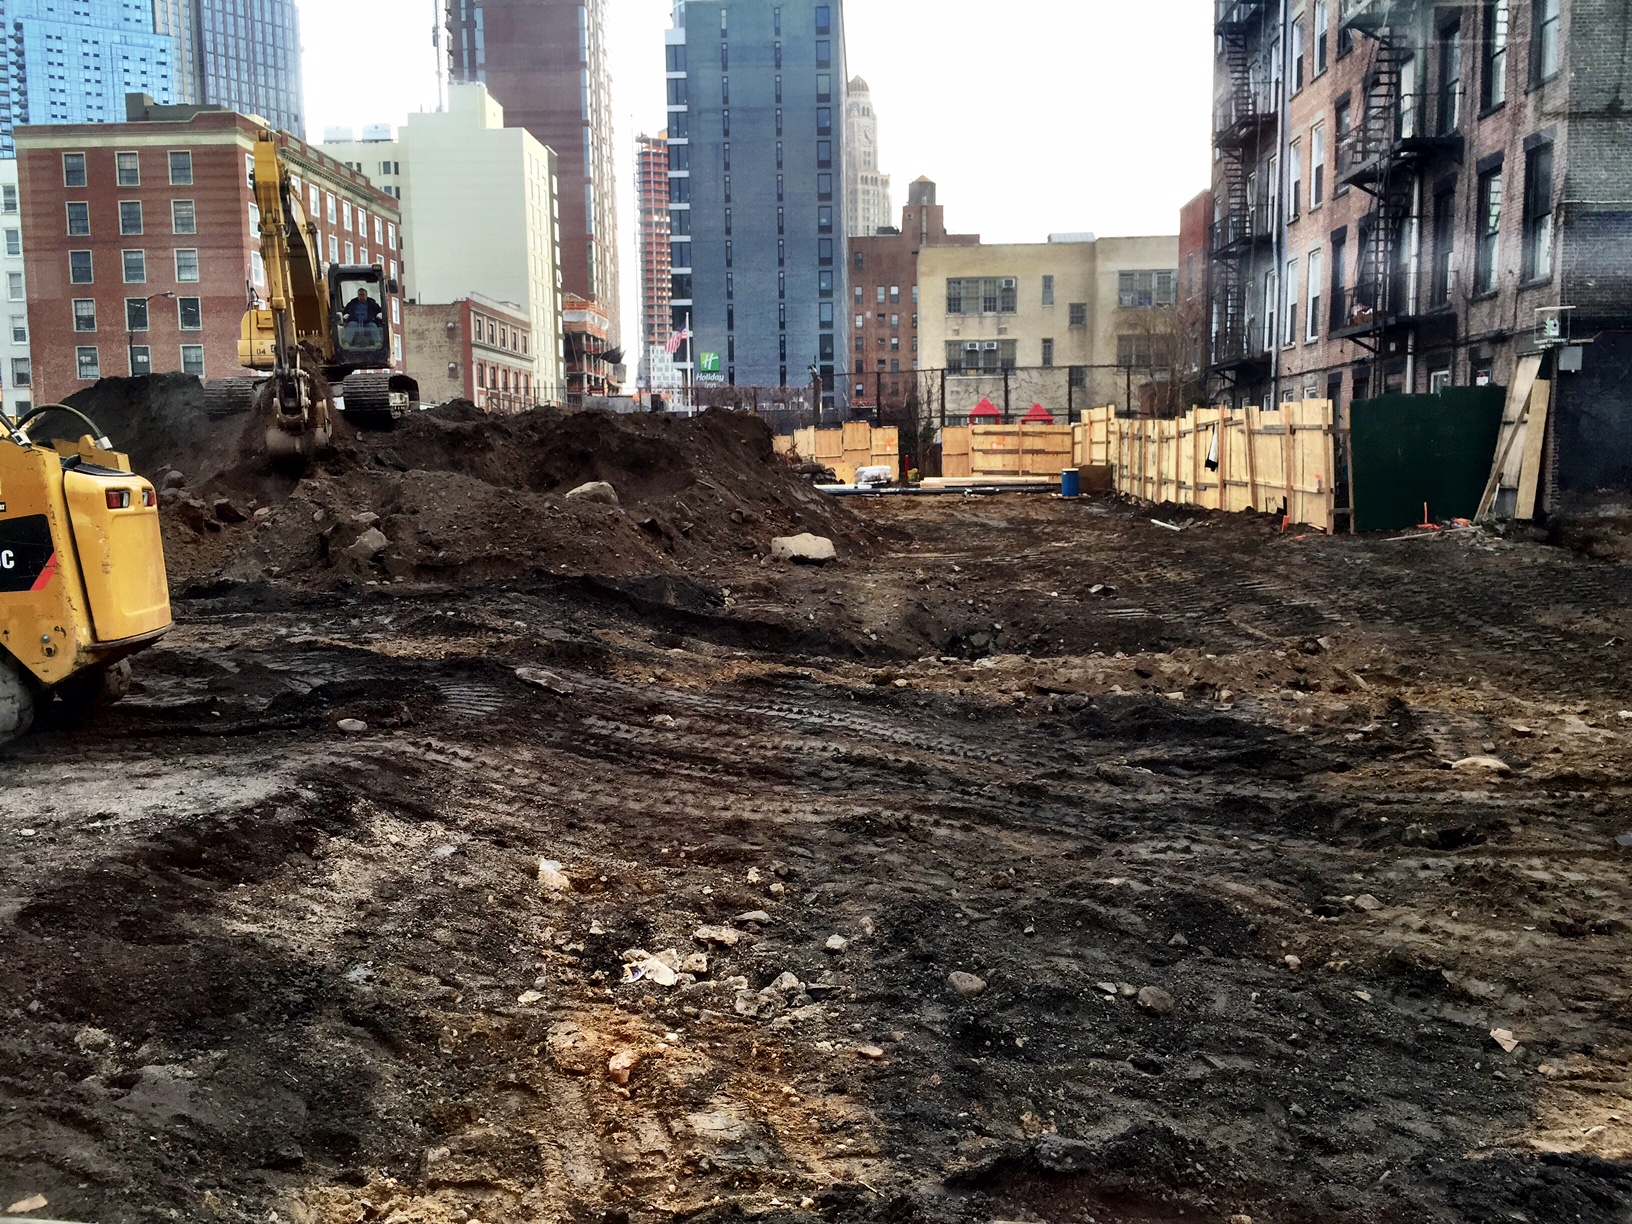 Work being done at 61 Bond Street in Brooklyn. Photo by Tectonic.